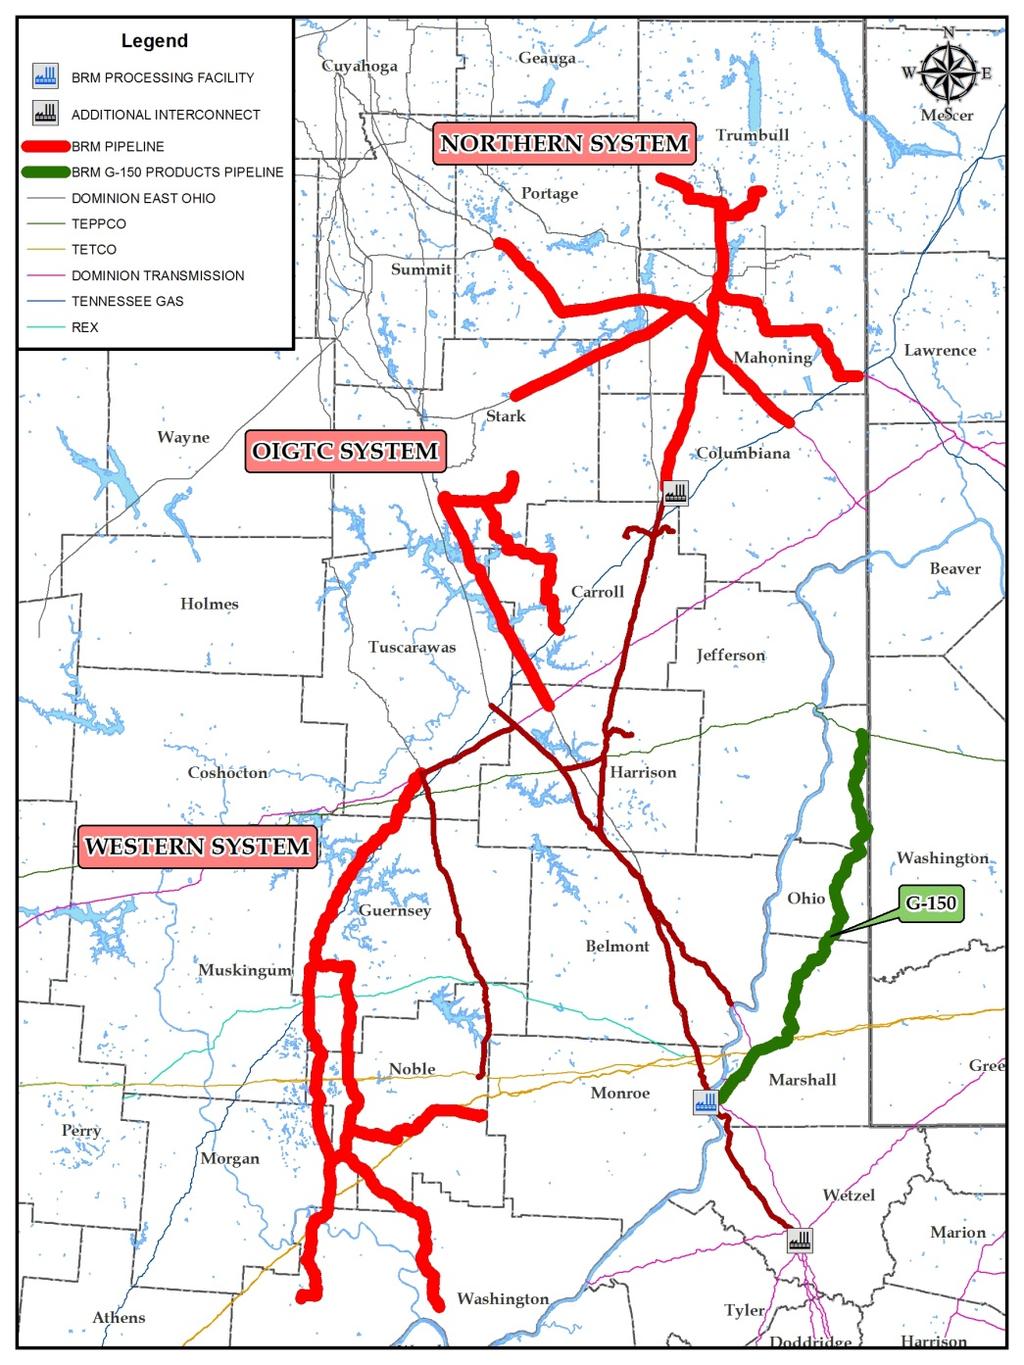 Approved Drop Downs BRM has approved acquisition, construction, and associated funding Approved Drop Downs from Dominion Western System (Q4 2014) 214 miles of 8 to 16 Operates 300 to 500 psi Northern